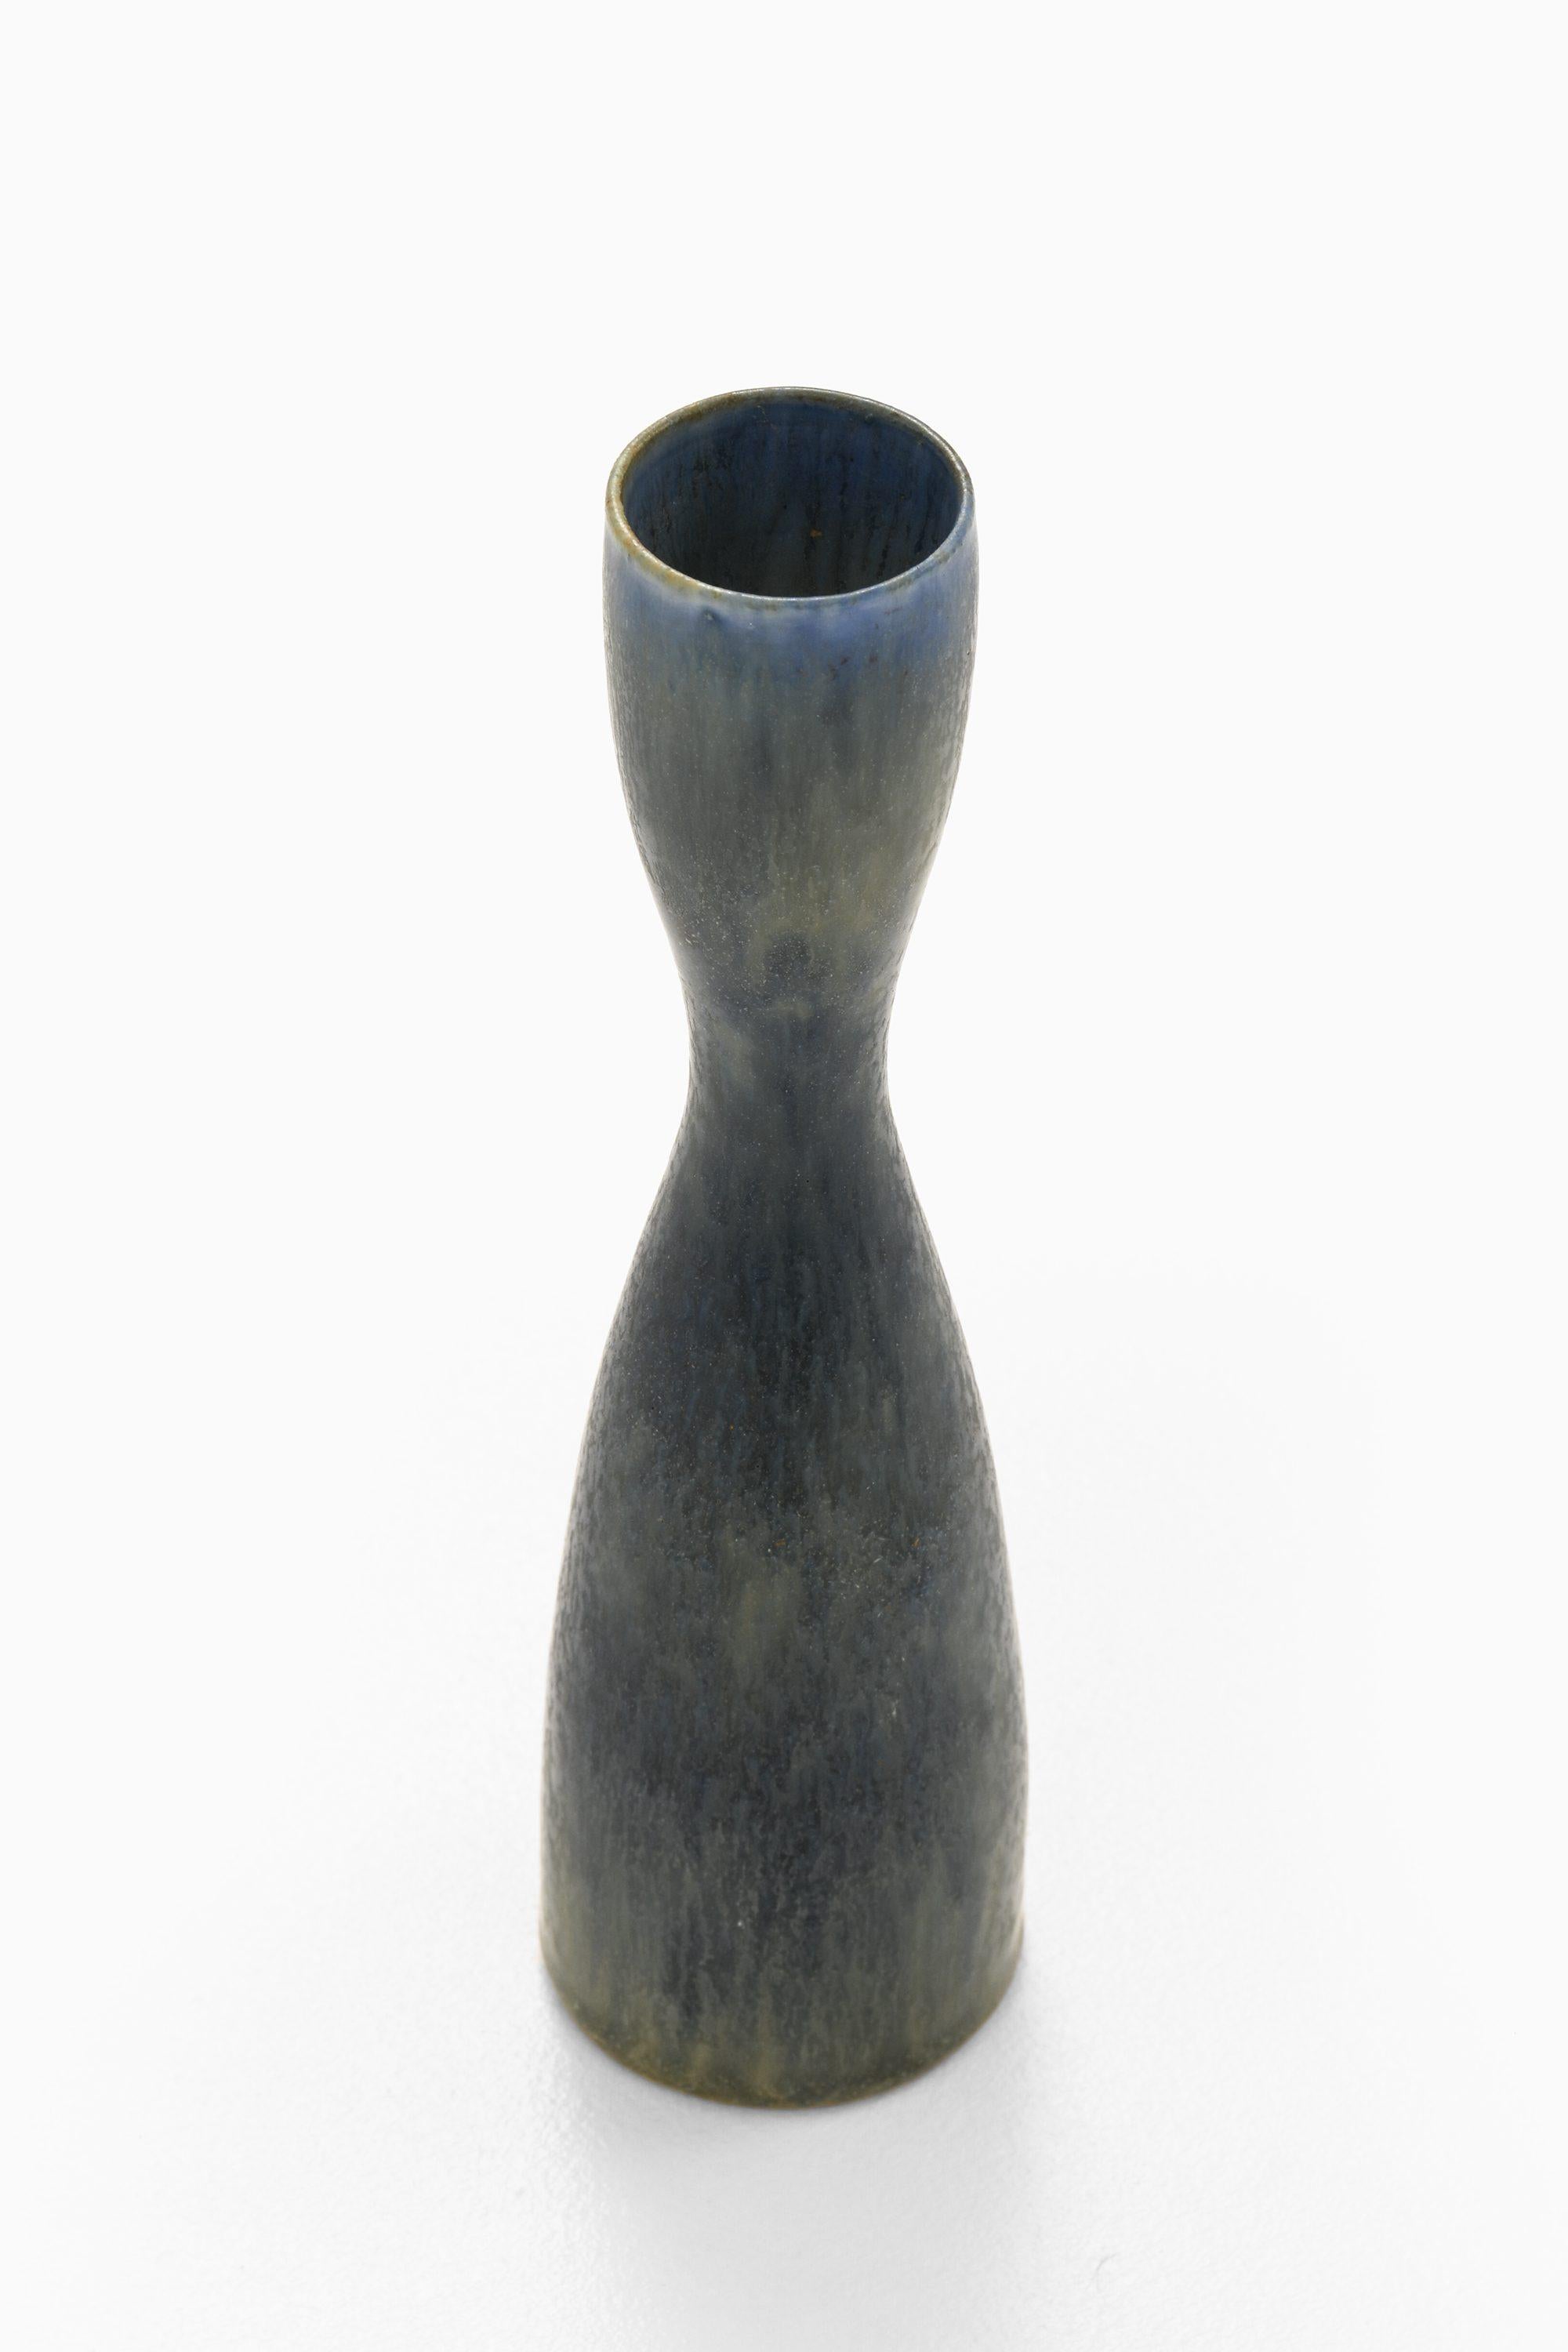 Ceramic Vase by Carl-Harry Stålhane, 1960's

Additional Information:
Material: Ceramic
Style: Mid century, Scandinavian
Produced by Rörstrand in Sweden
Dimensions (W x D x H): 5.5 x 5.5 x 20.5 cm
Condition: Good vintage condition, with signs of usage